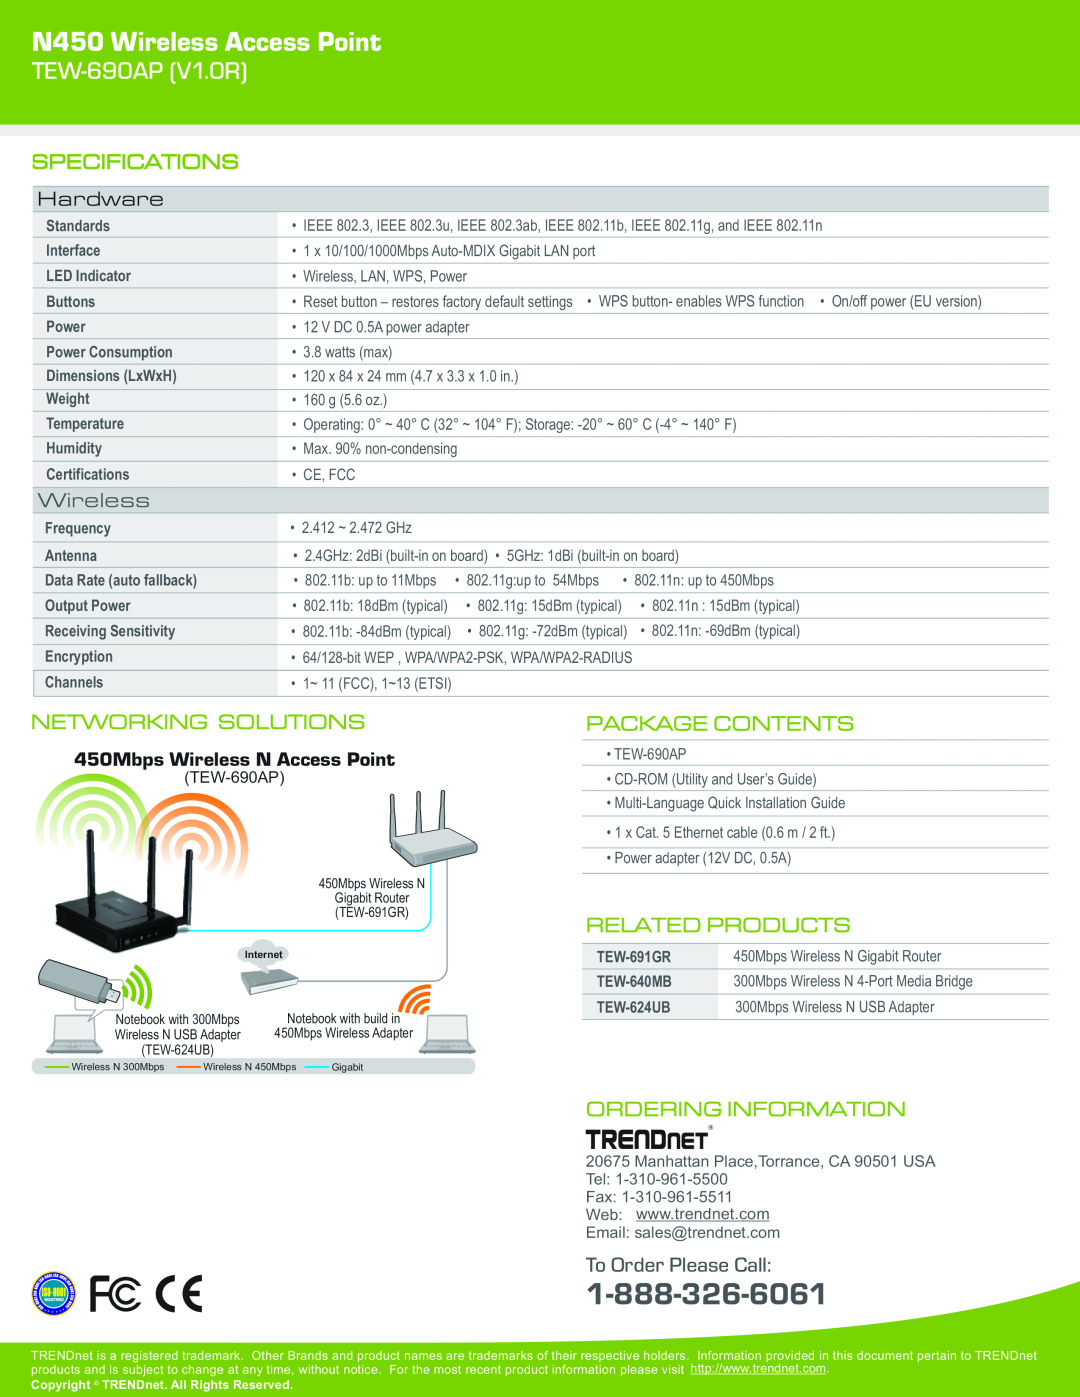 TRENDnet TEW690AP warranty N450 Wireless Access Point, TEW-690AP V1.0R, Specifications, Hardware, Networking Solutions 